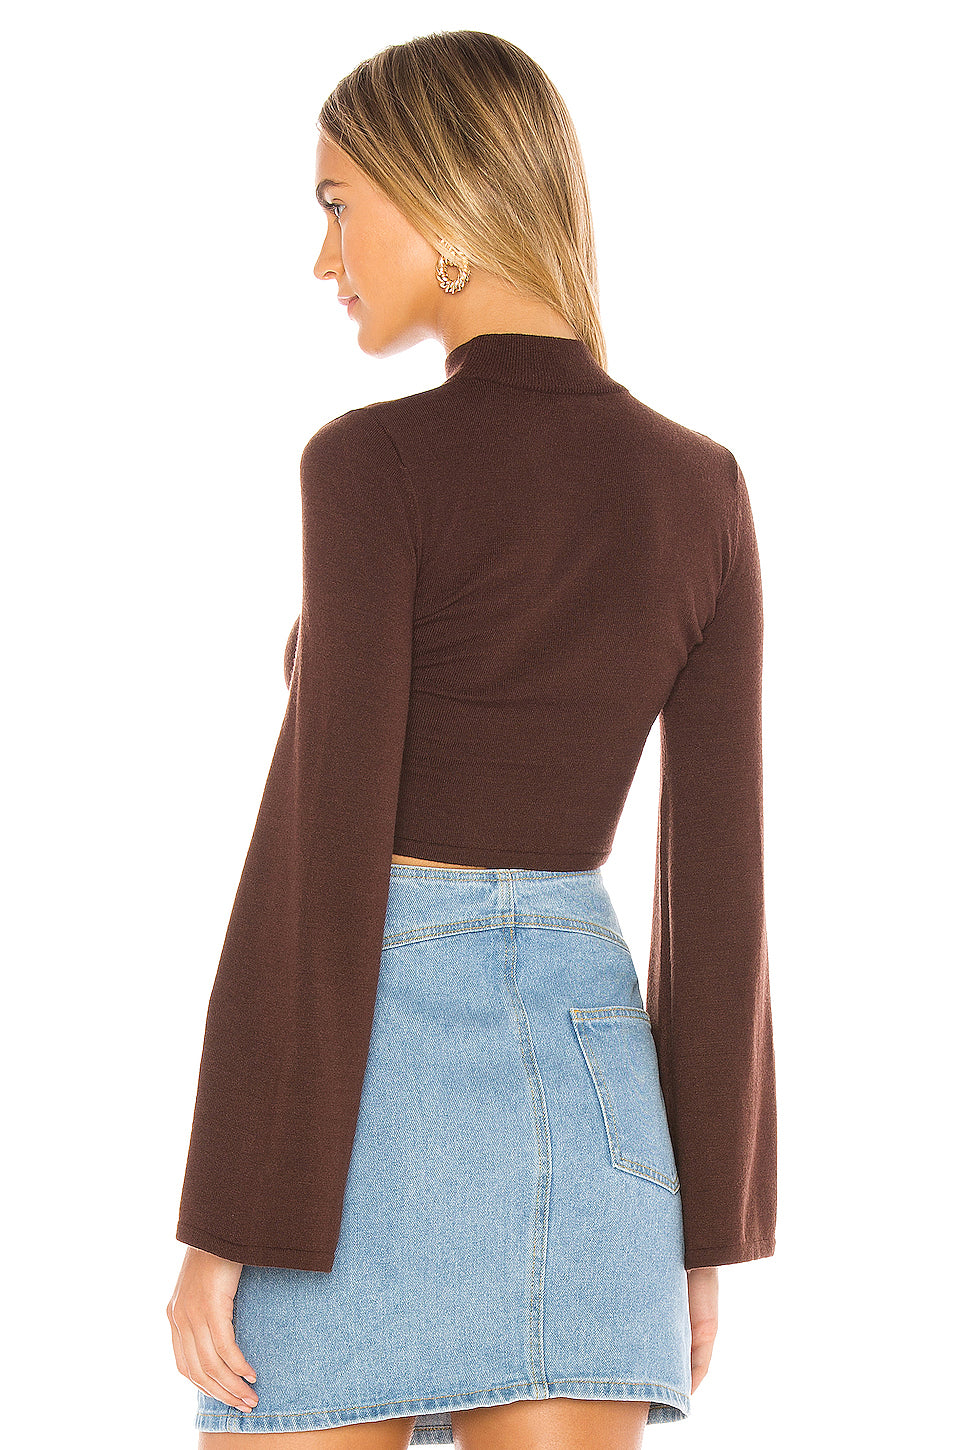 Colette Sweater in BROWN